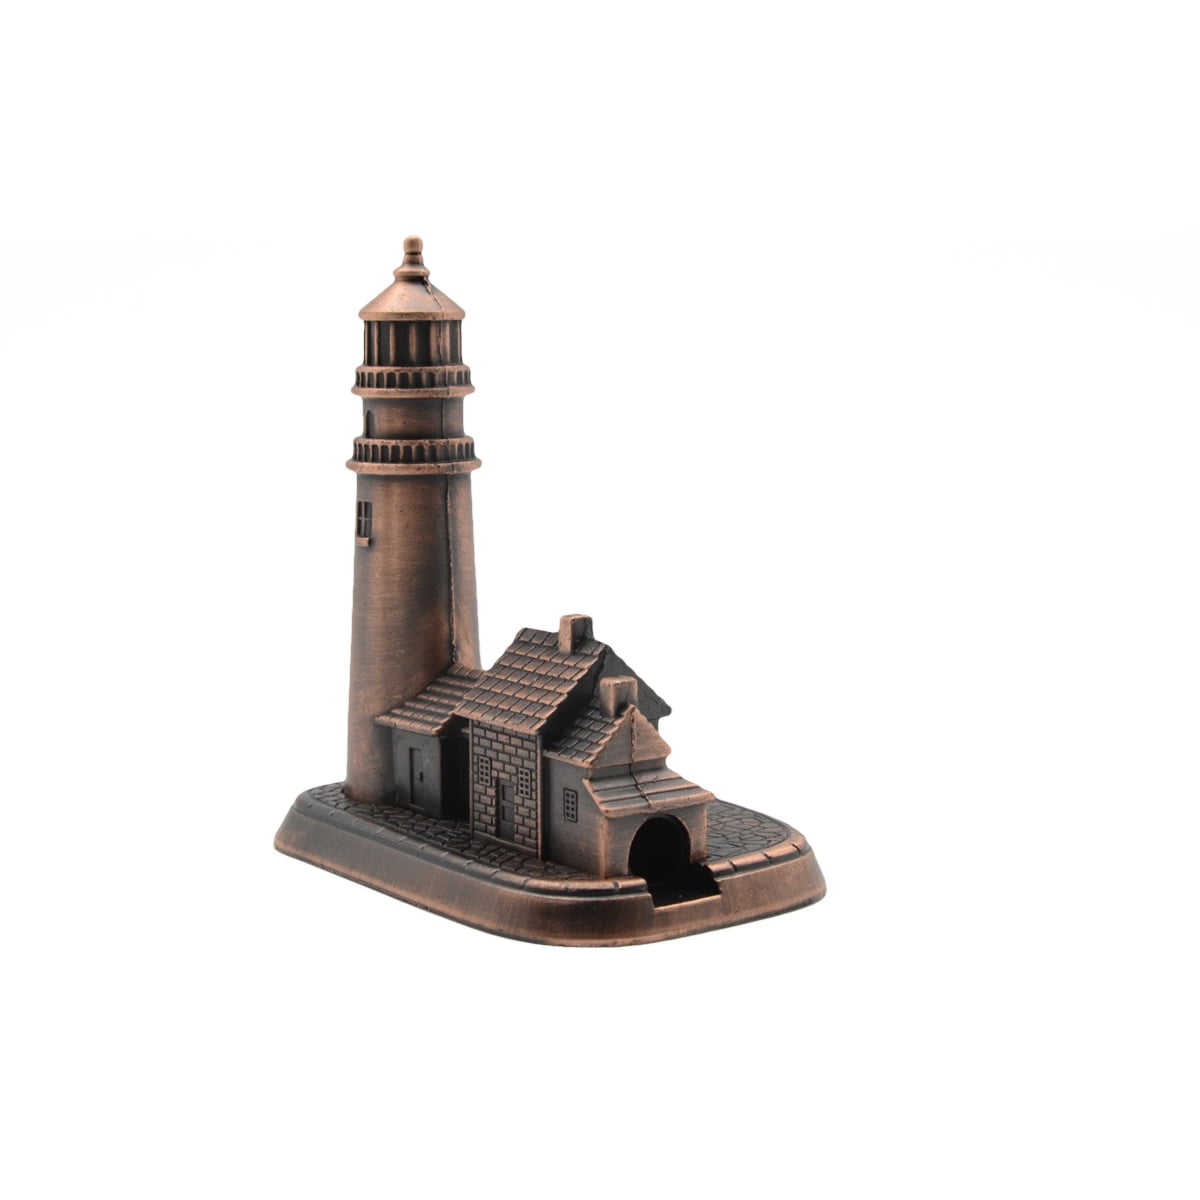 Metal Lighthouse Pencil Sharpener Novelty Desk Accessory Die Cast Collectible 